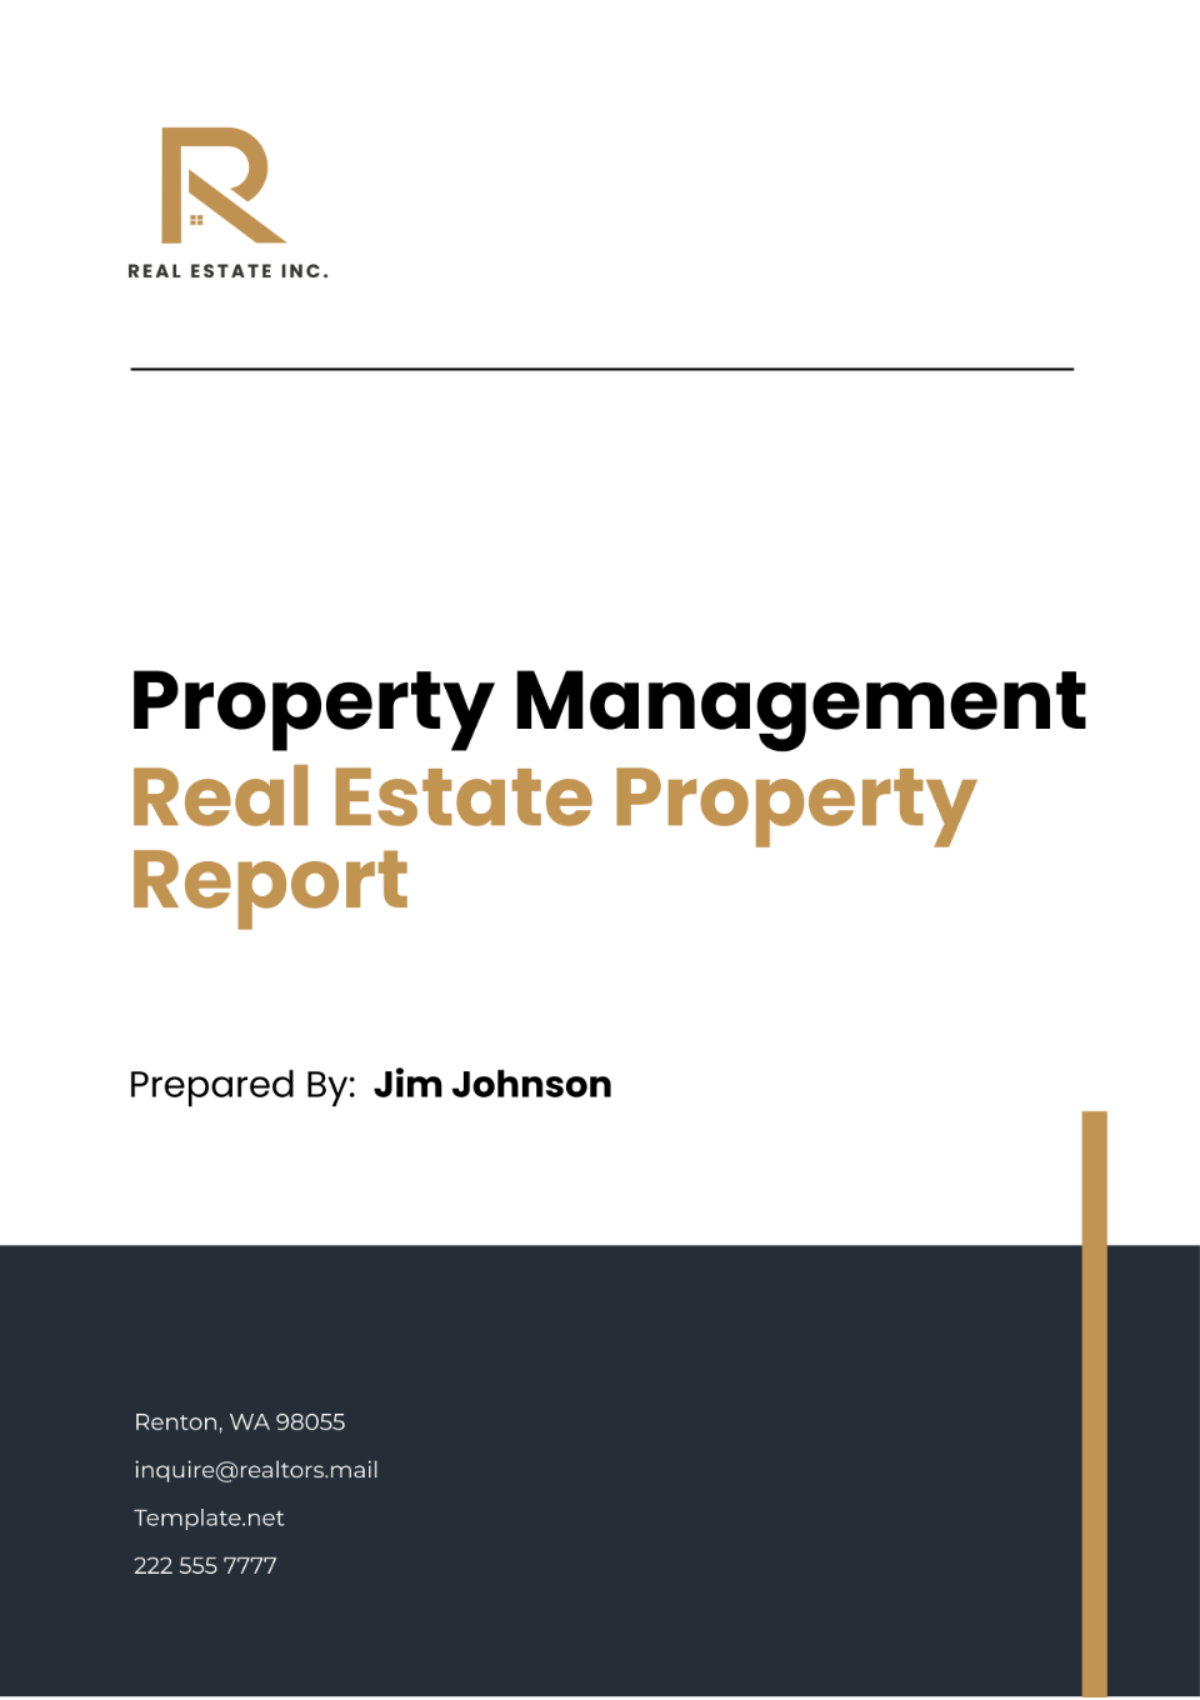 Real Estate Property Report Template